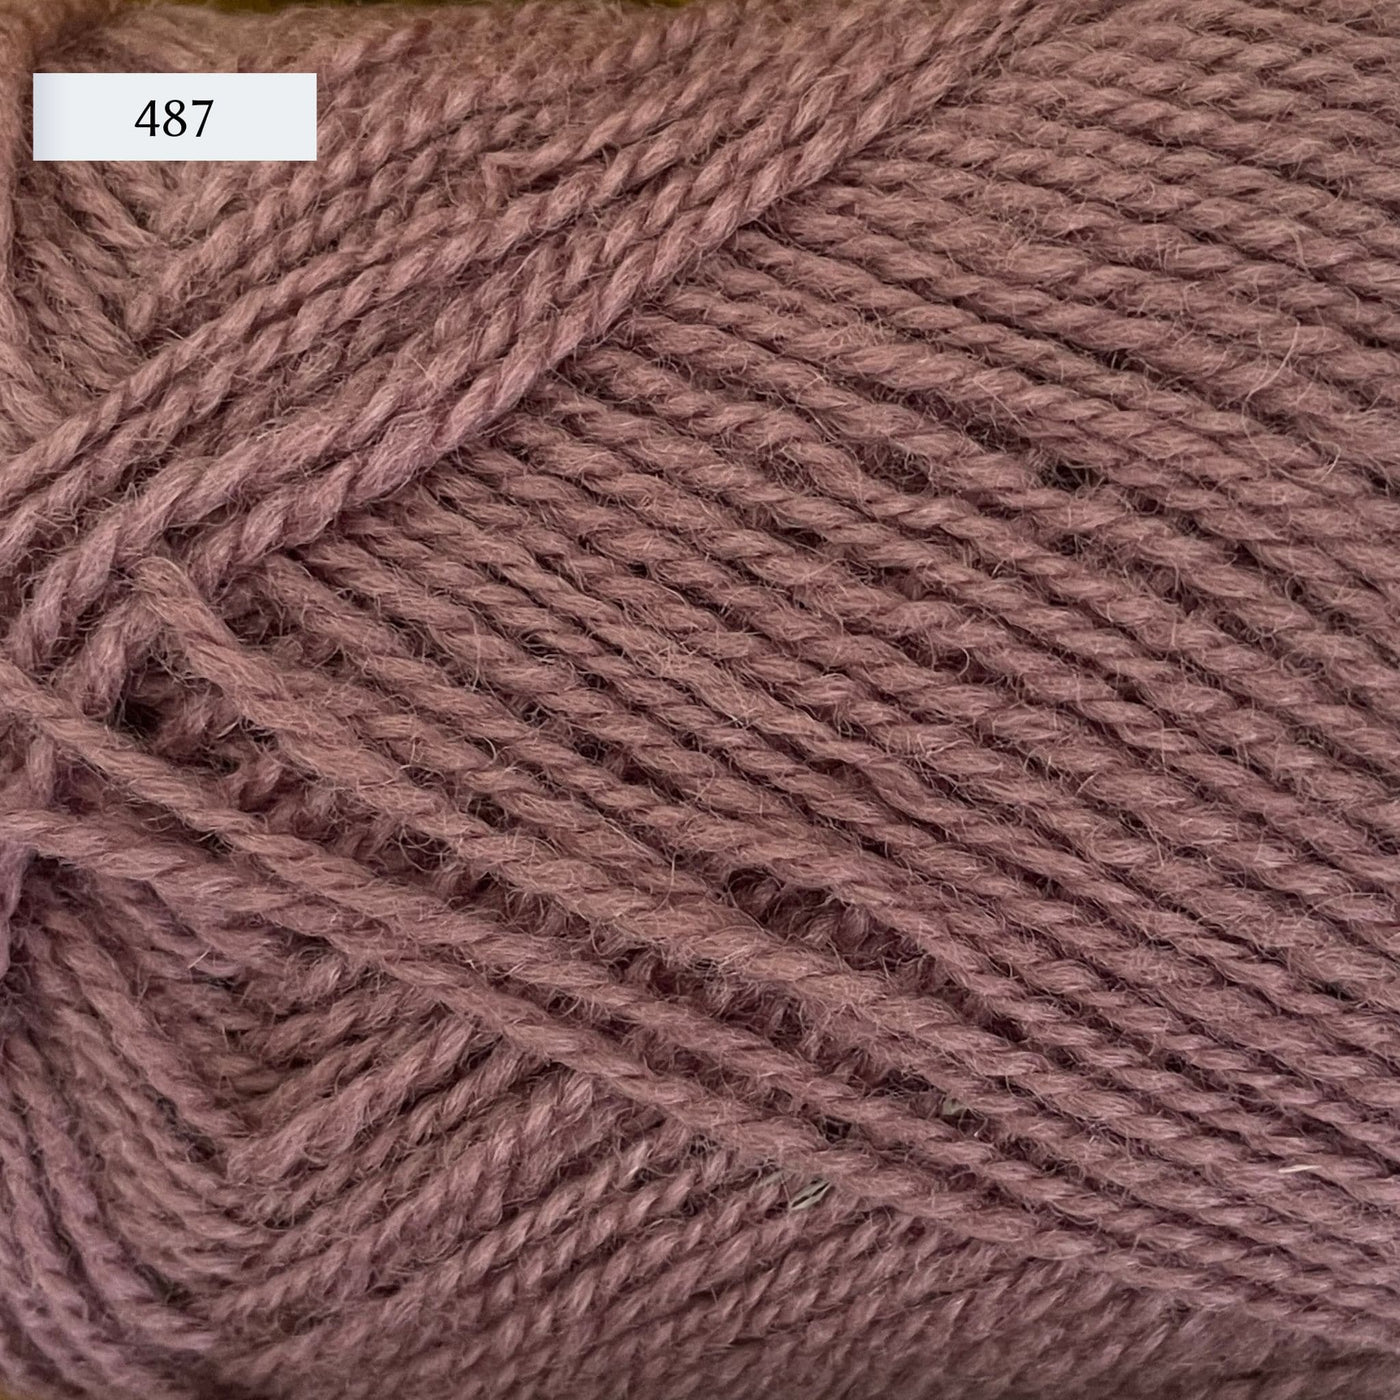 Rauma Gammelserie 2ply wool yarn, fingering weight, in color 487, dusty mauve